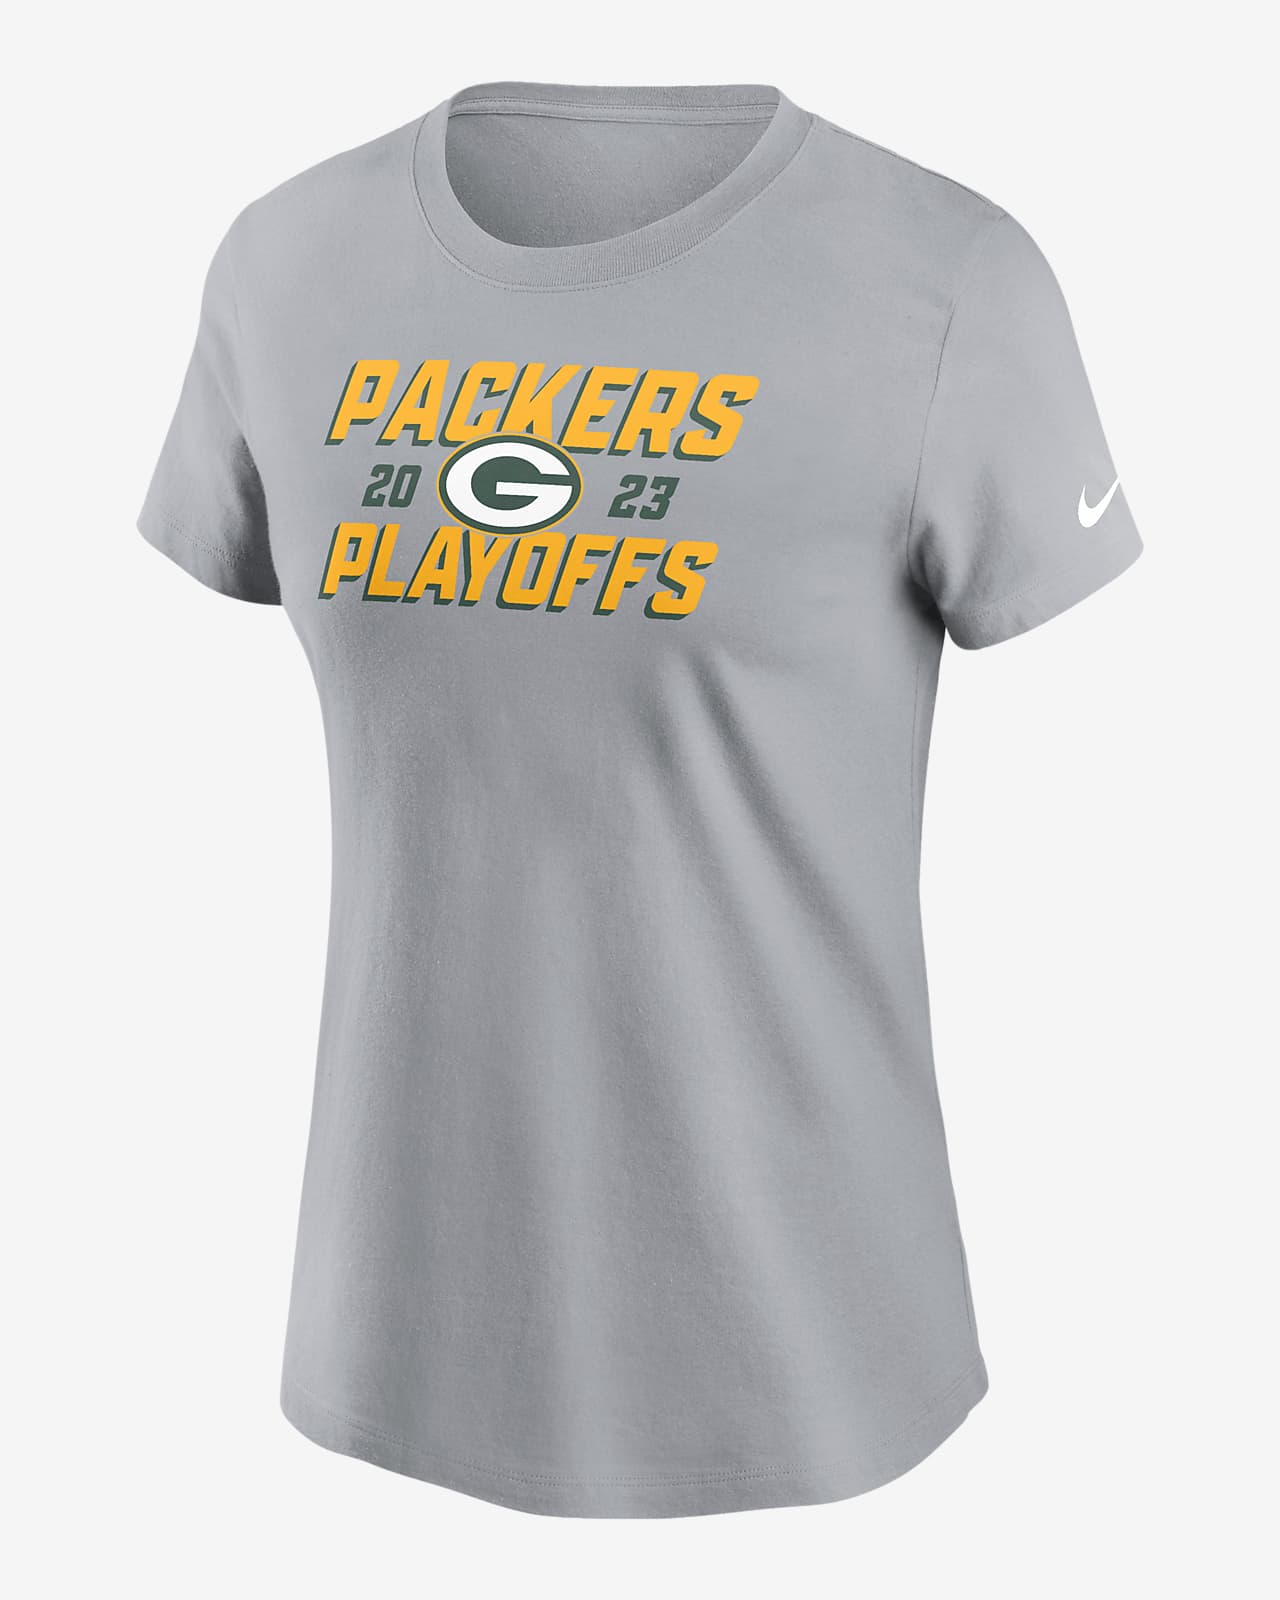 Green Bay Packers Plus Sizes Clothing, Packers Plus Sizes Apparel, Gear &  Merchandise